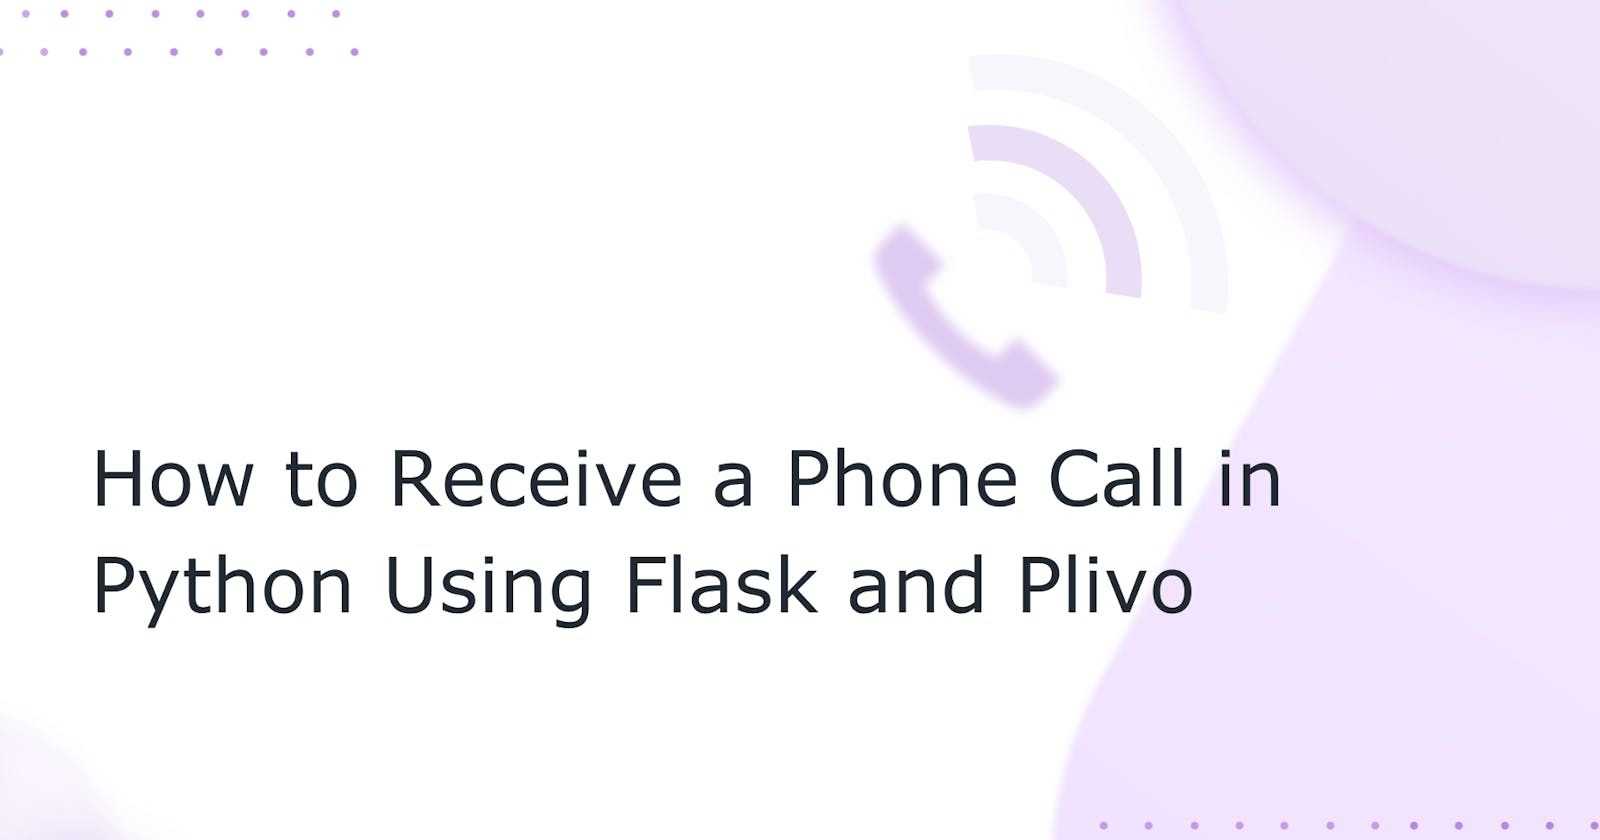 How to Receive a Phone Call in Python with Flask and Plivo